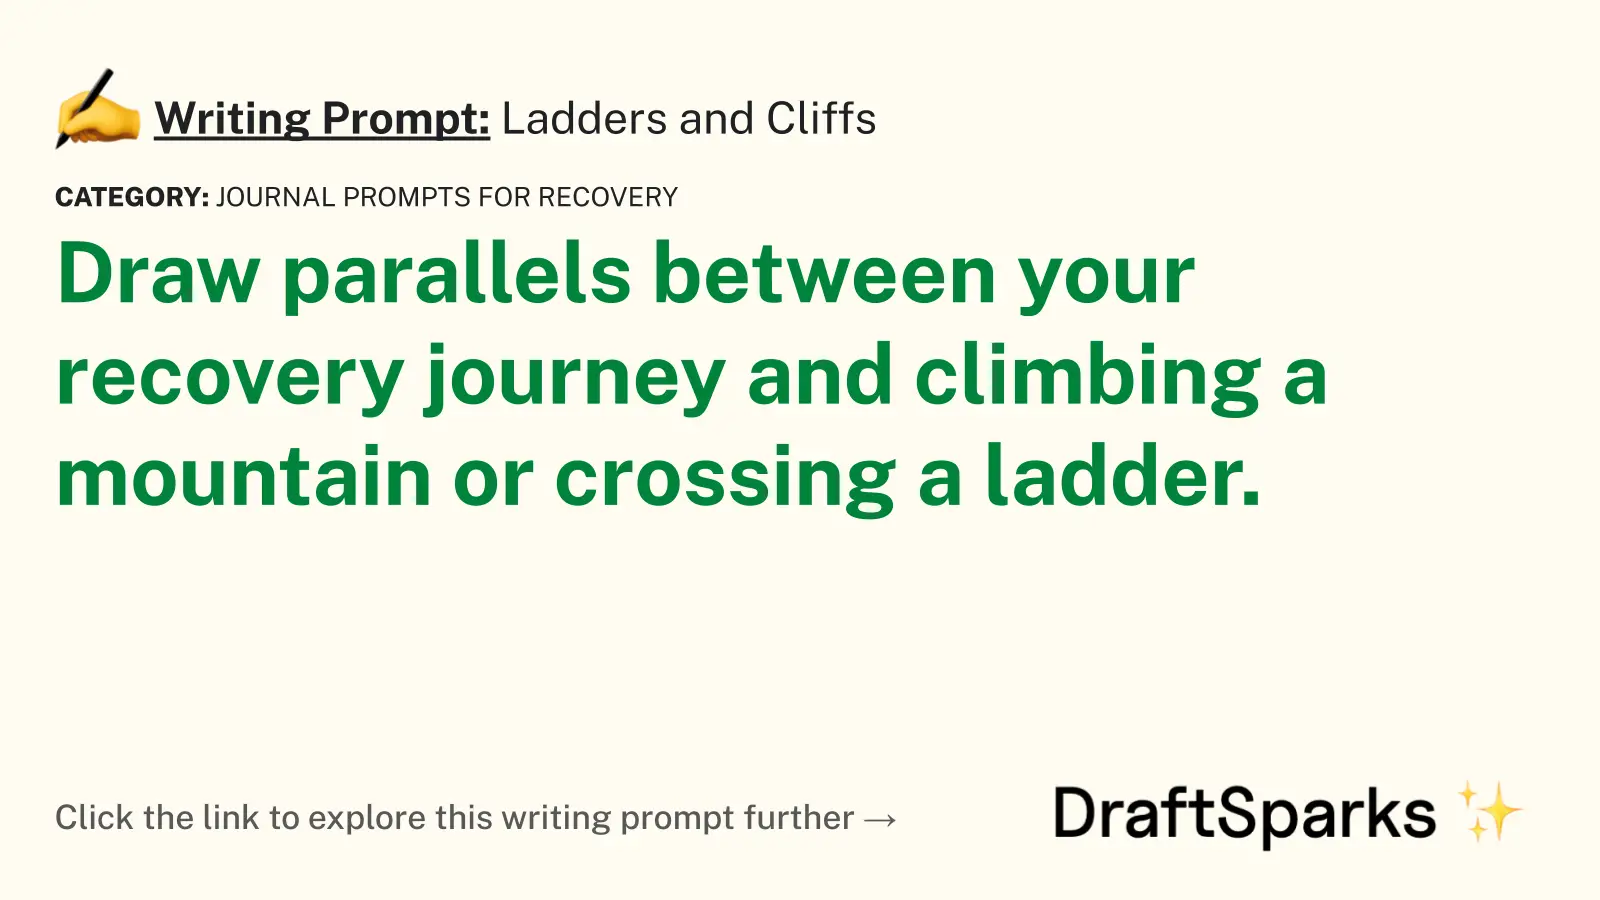 Ladders and Cliffs